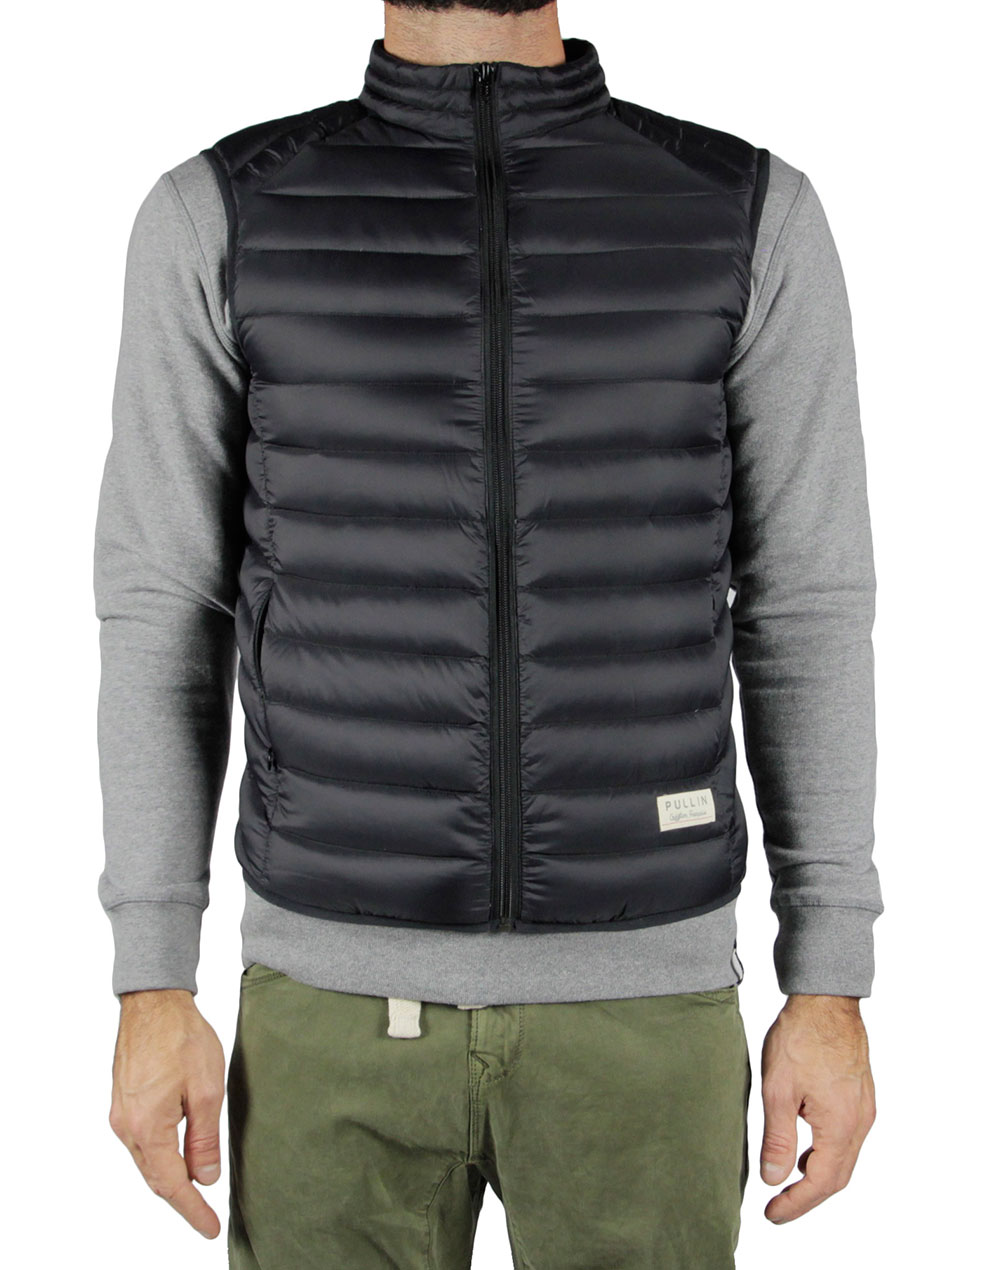 Men's feather jacket without sleeves LEAP